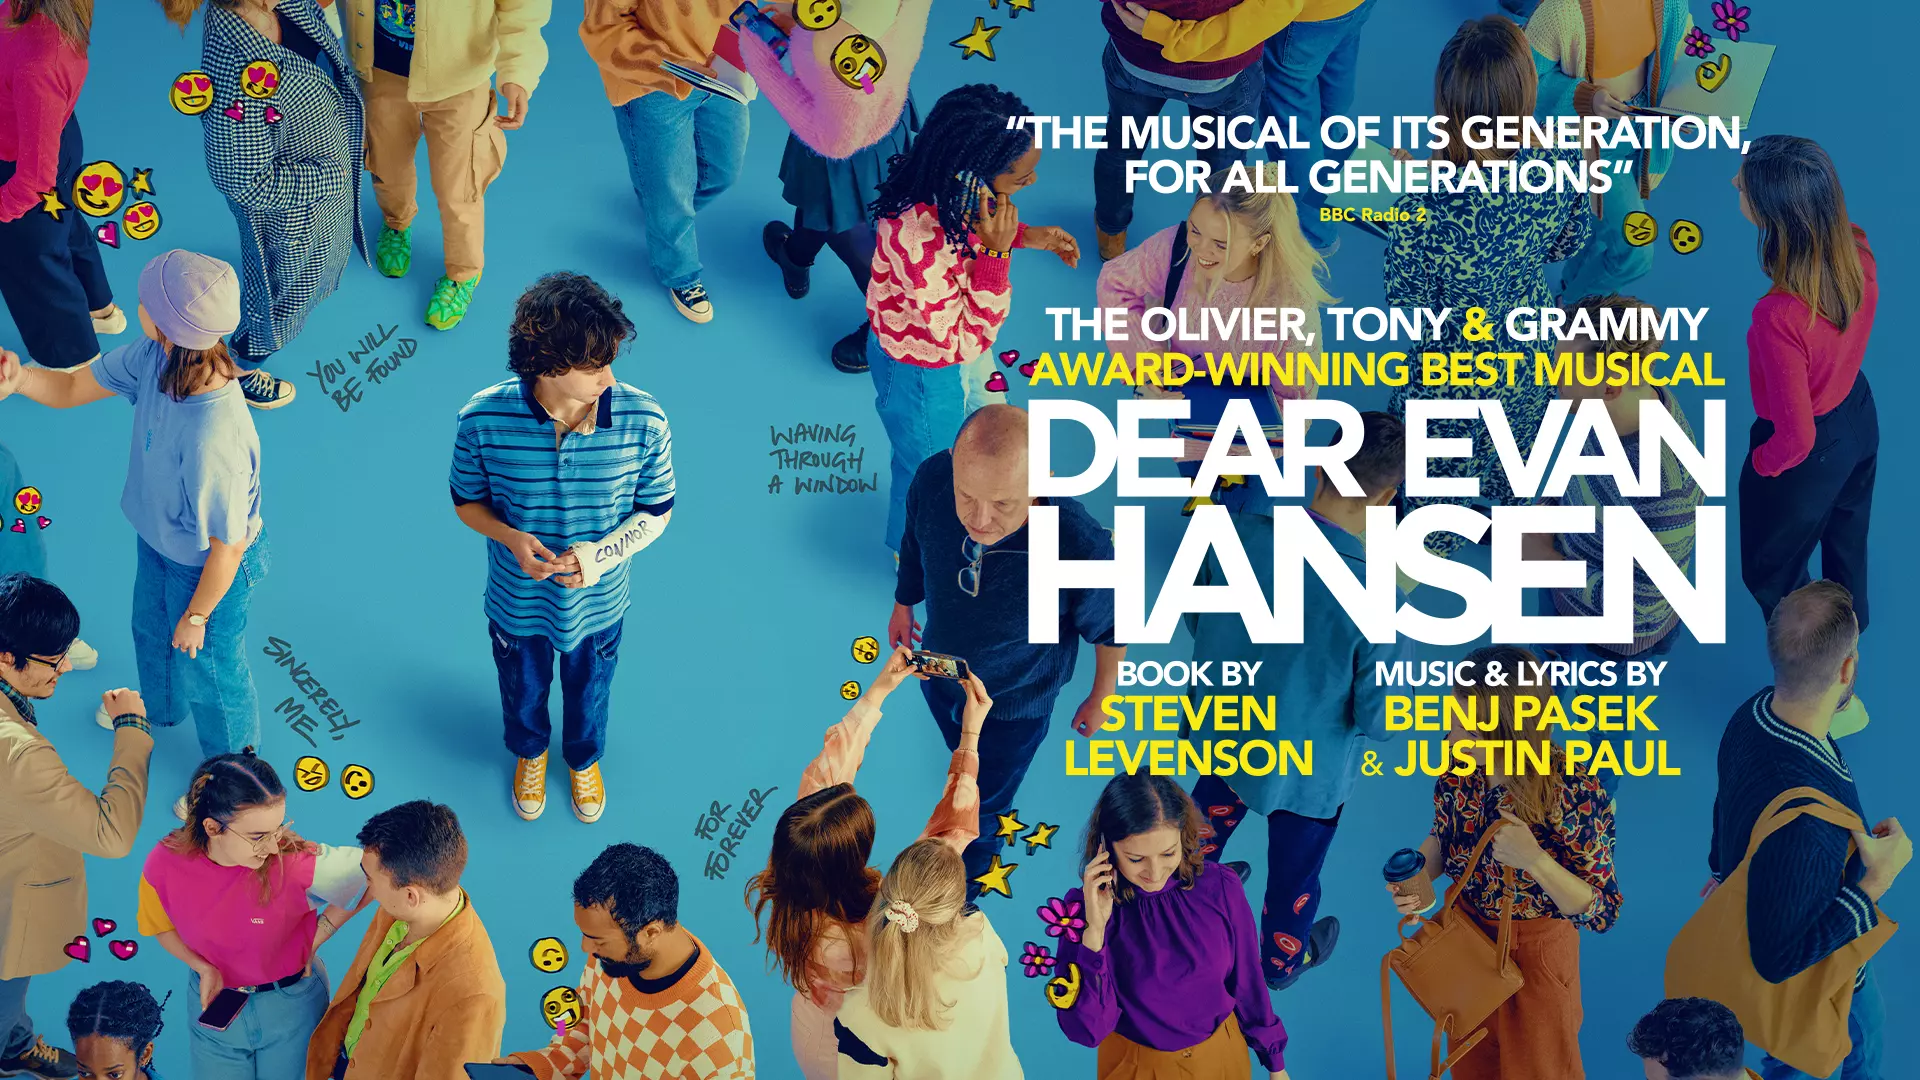 A new production of the Olivier, Tony and Grammy award-winning Best Musical DEAR EVAN HANSEN.